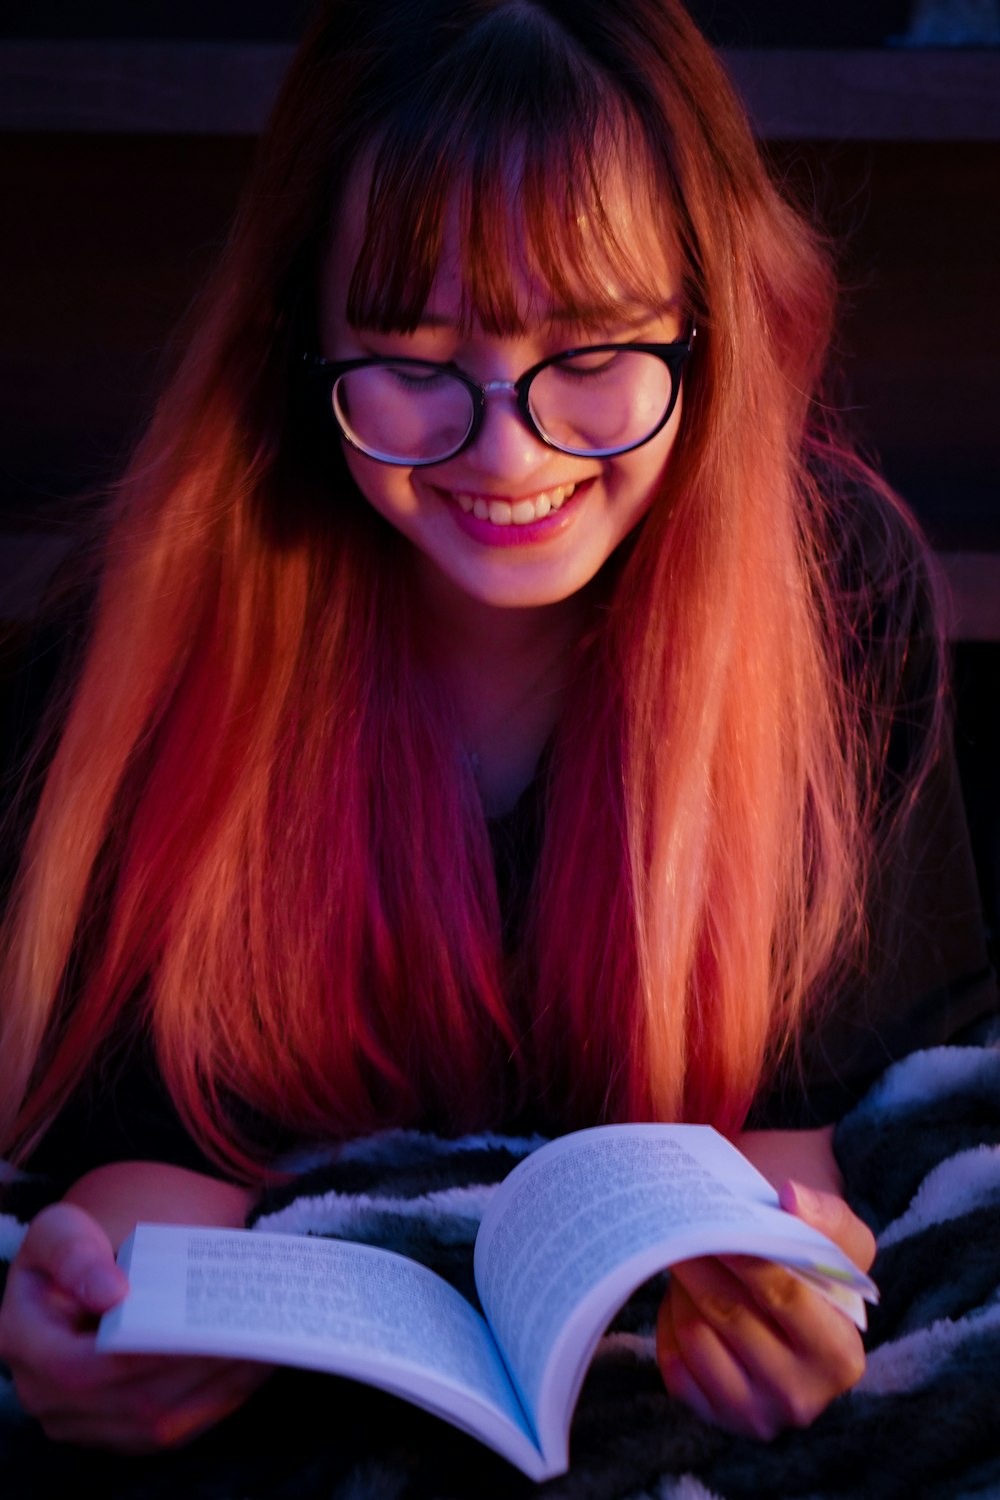 a person with red hair and glasses holding a book